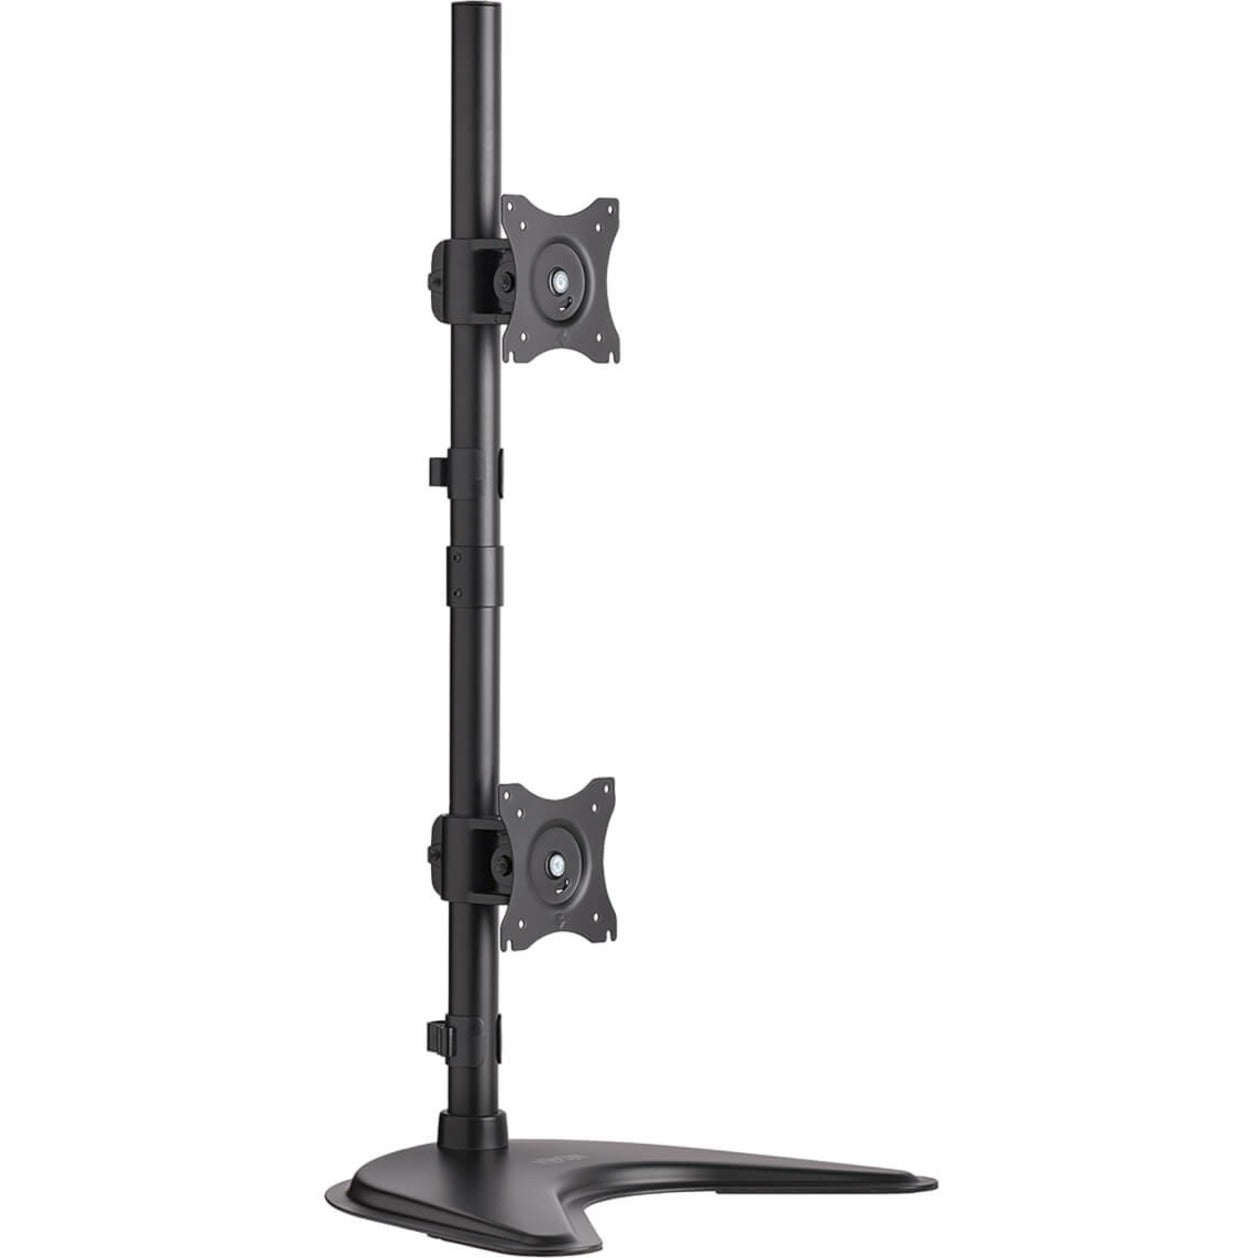 Tripp Lite DDR1527SDC Display Stand, Dual Vertical Flat-Screen Desk Stand/Clamp Mount, Adjustable Angle, 20 lb Maximum Load Capacity